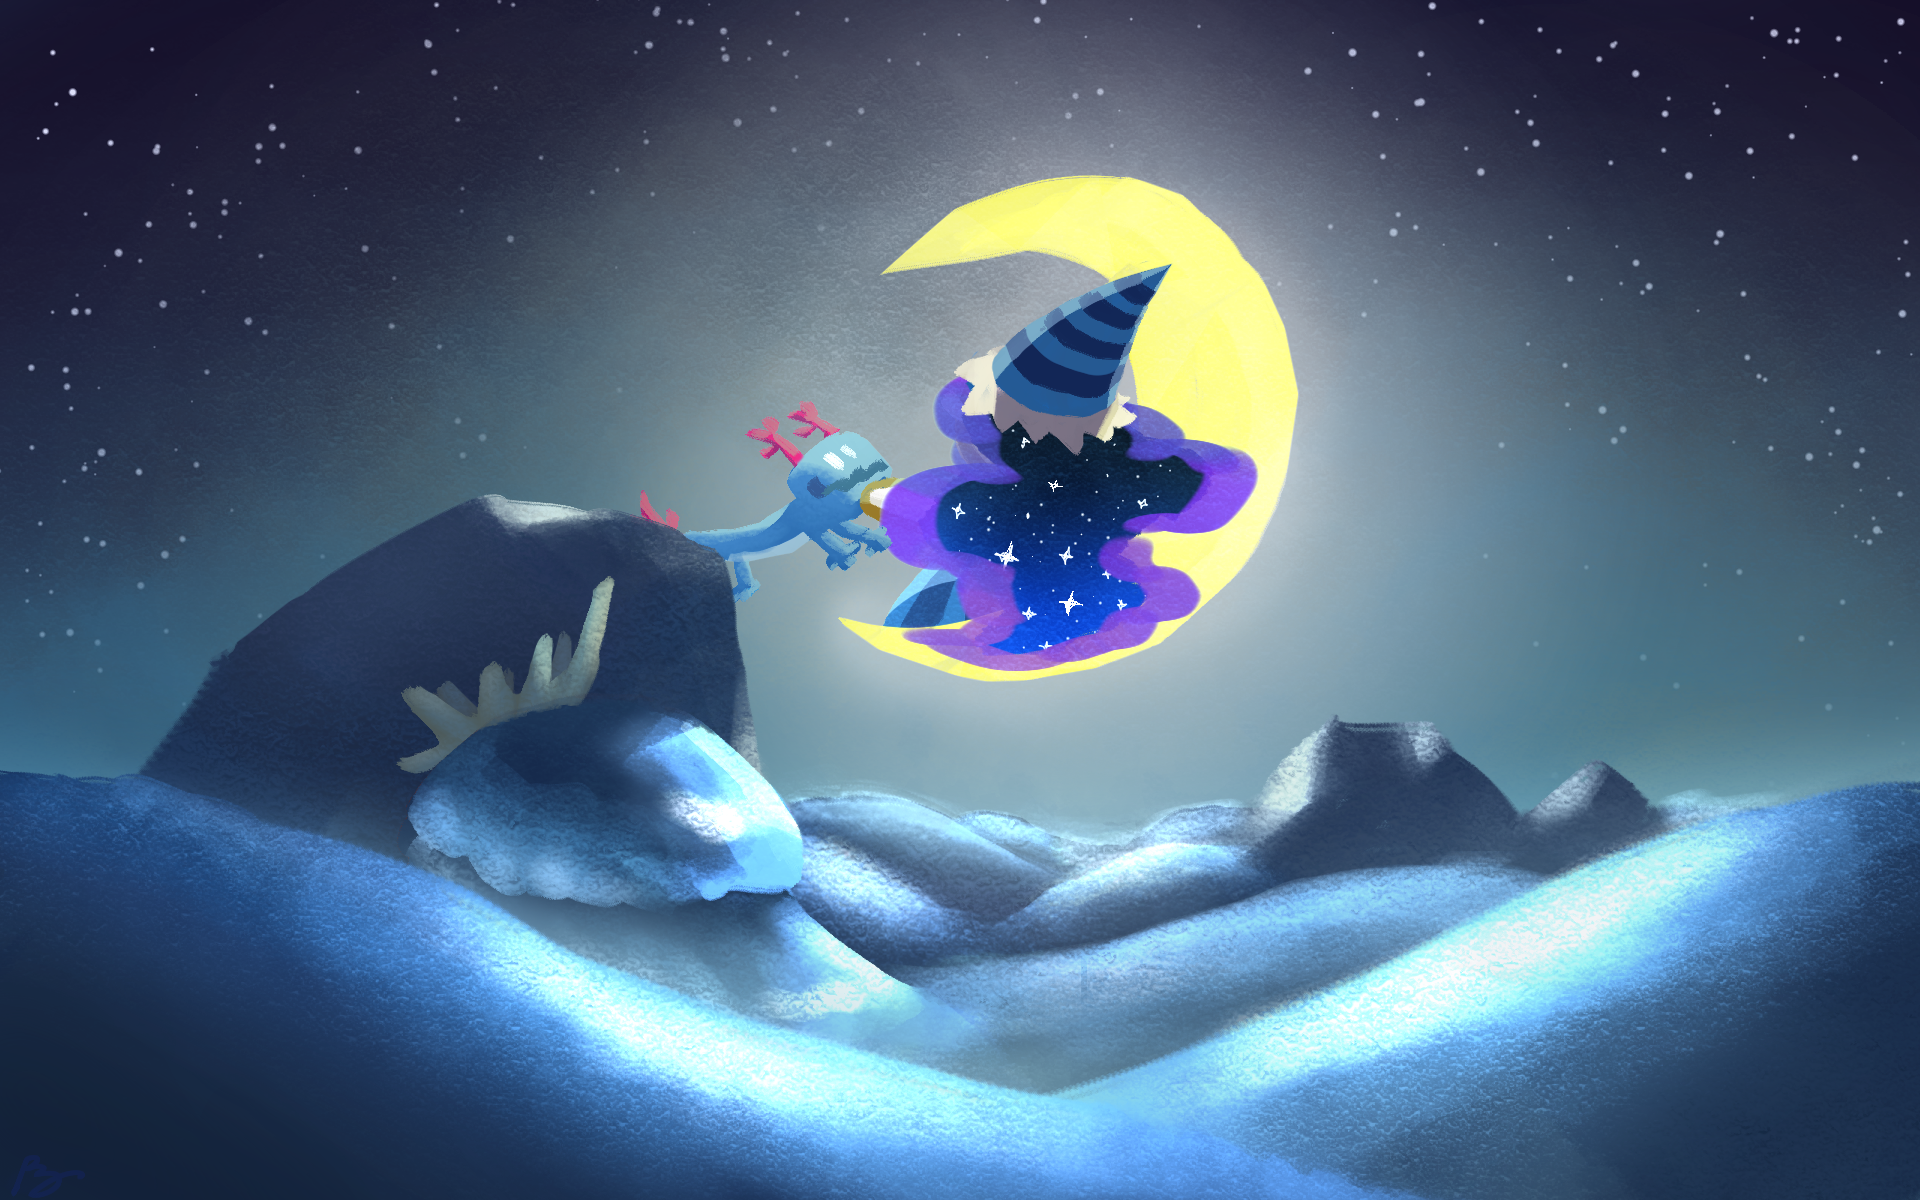 A painting of Sea Fairy and Moonlight Cookie. Thought I'd share my headcanon on how they met